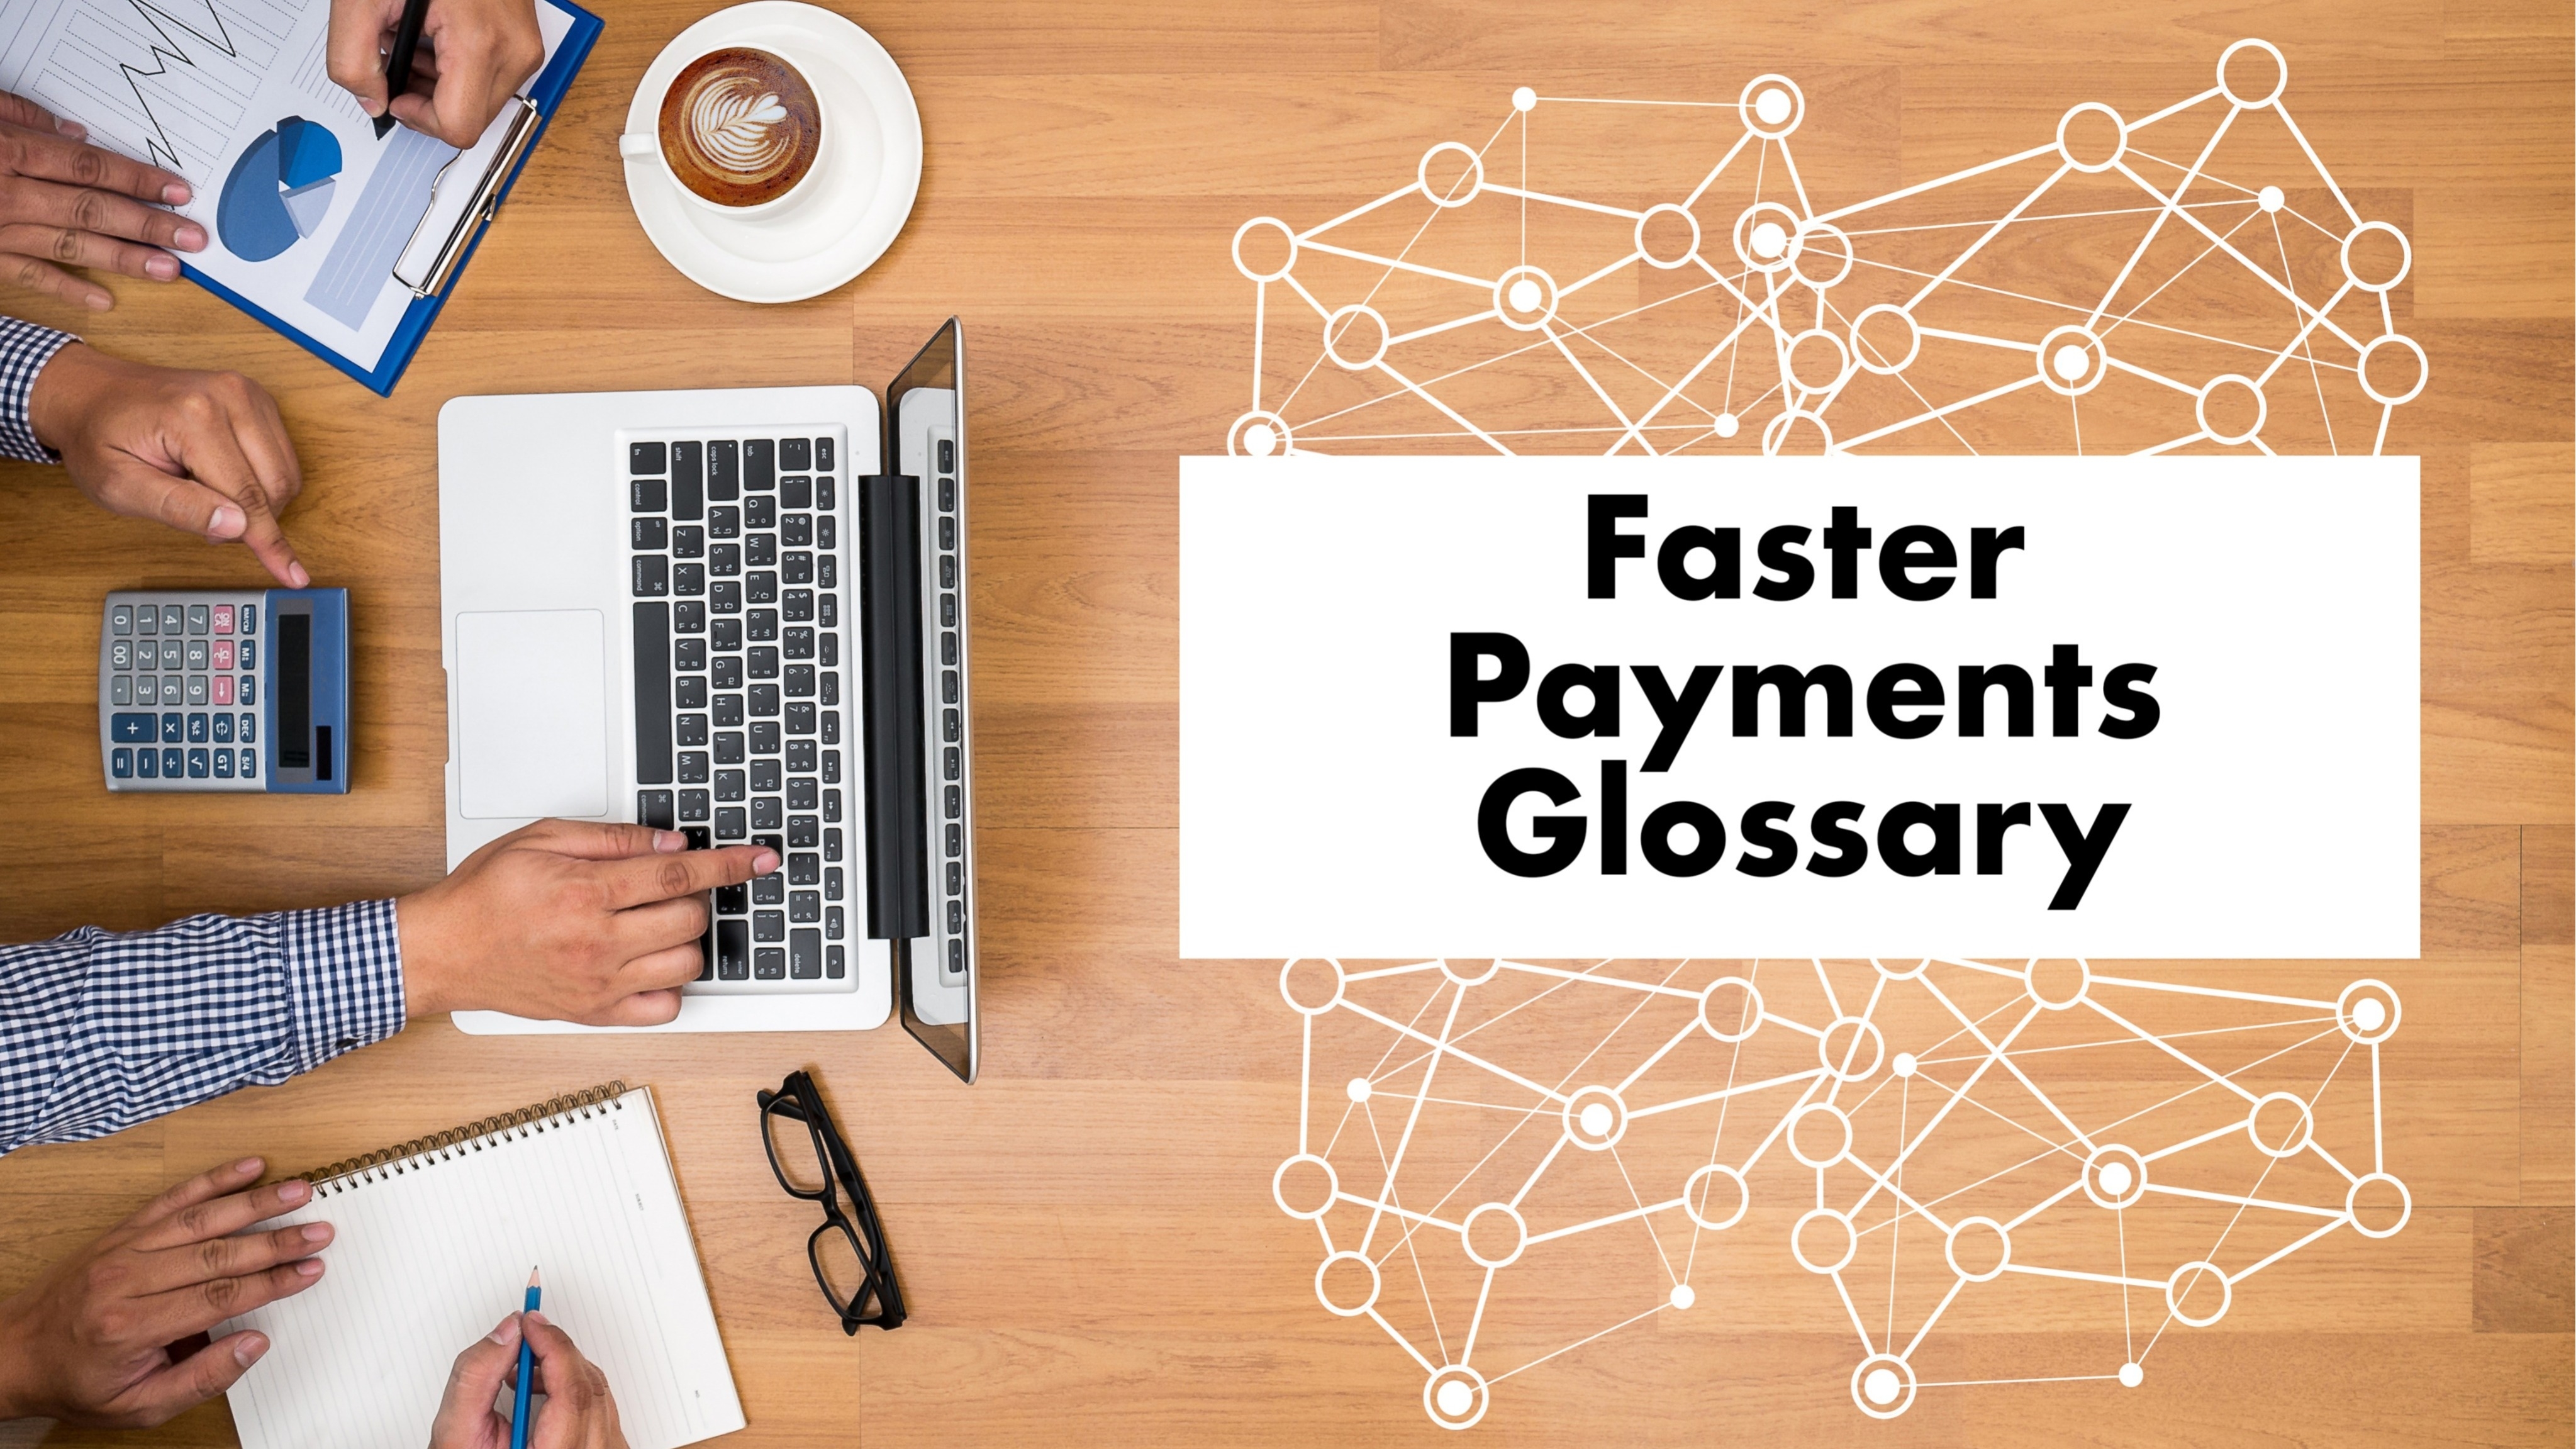 
Faster Payments Glossary of Terms